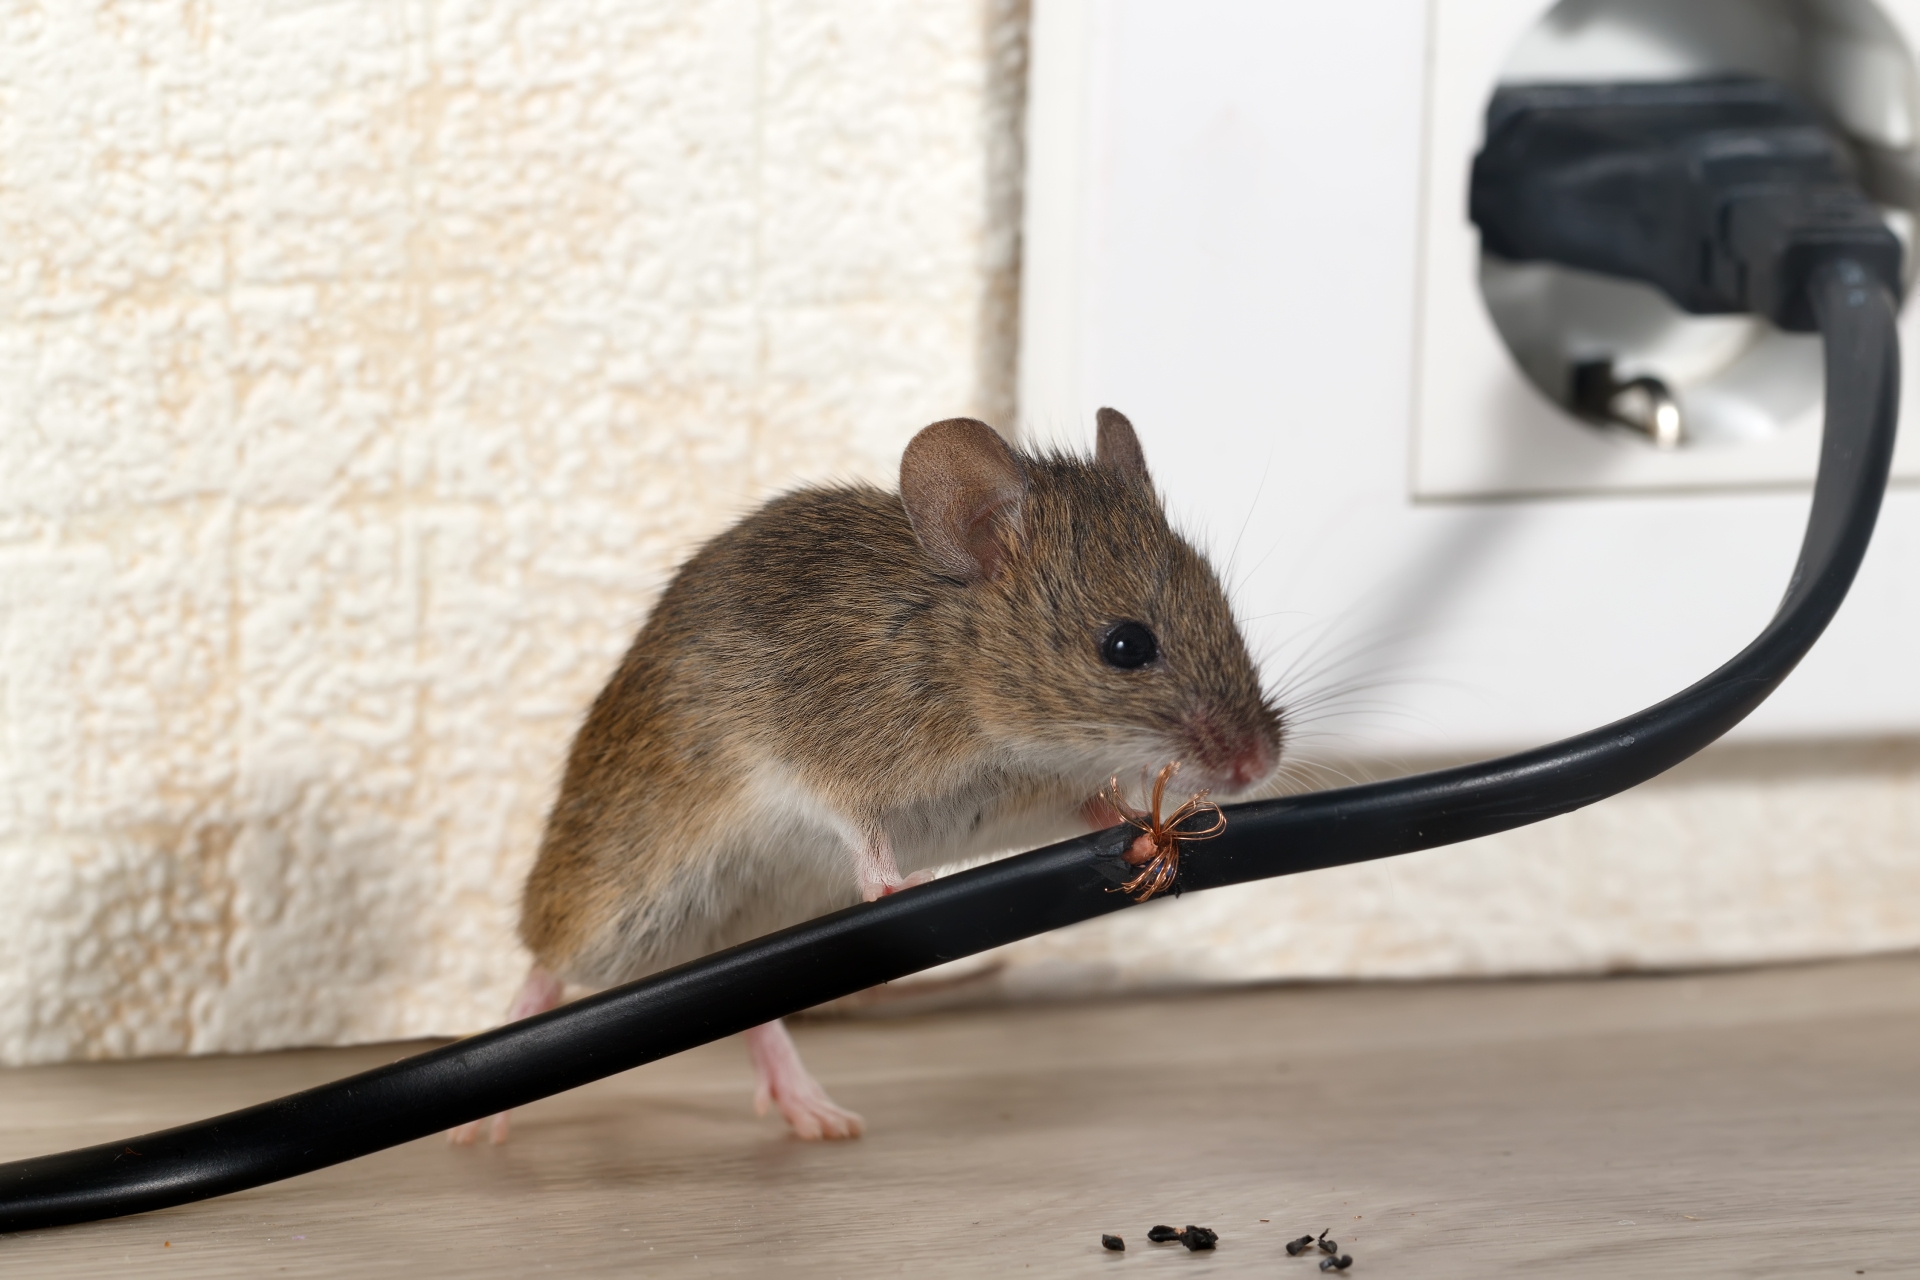 Mice Infestation, Pest Control in Colindale, Kingsbury, NW9. Call Now 020 8166 9746